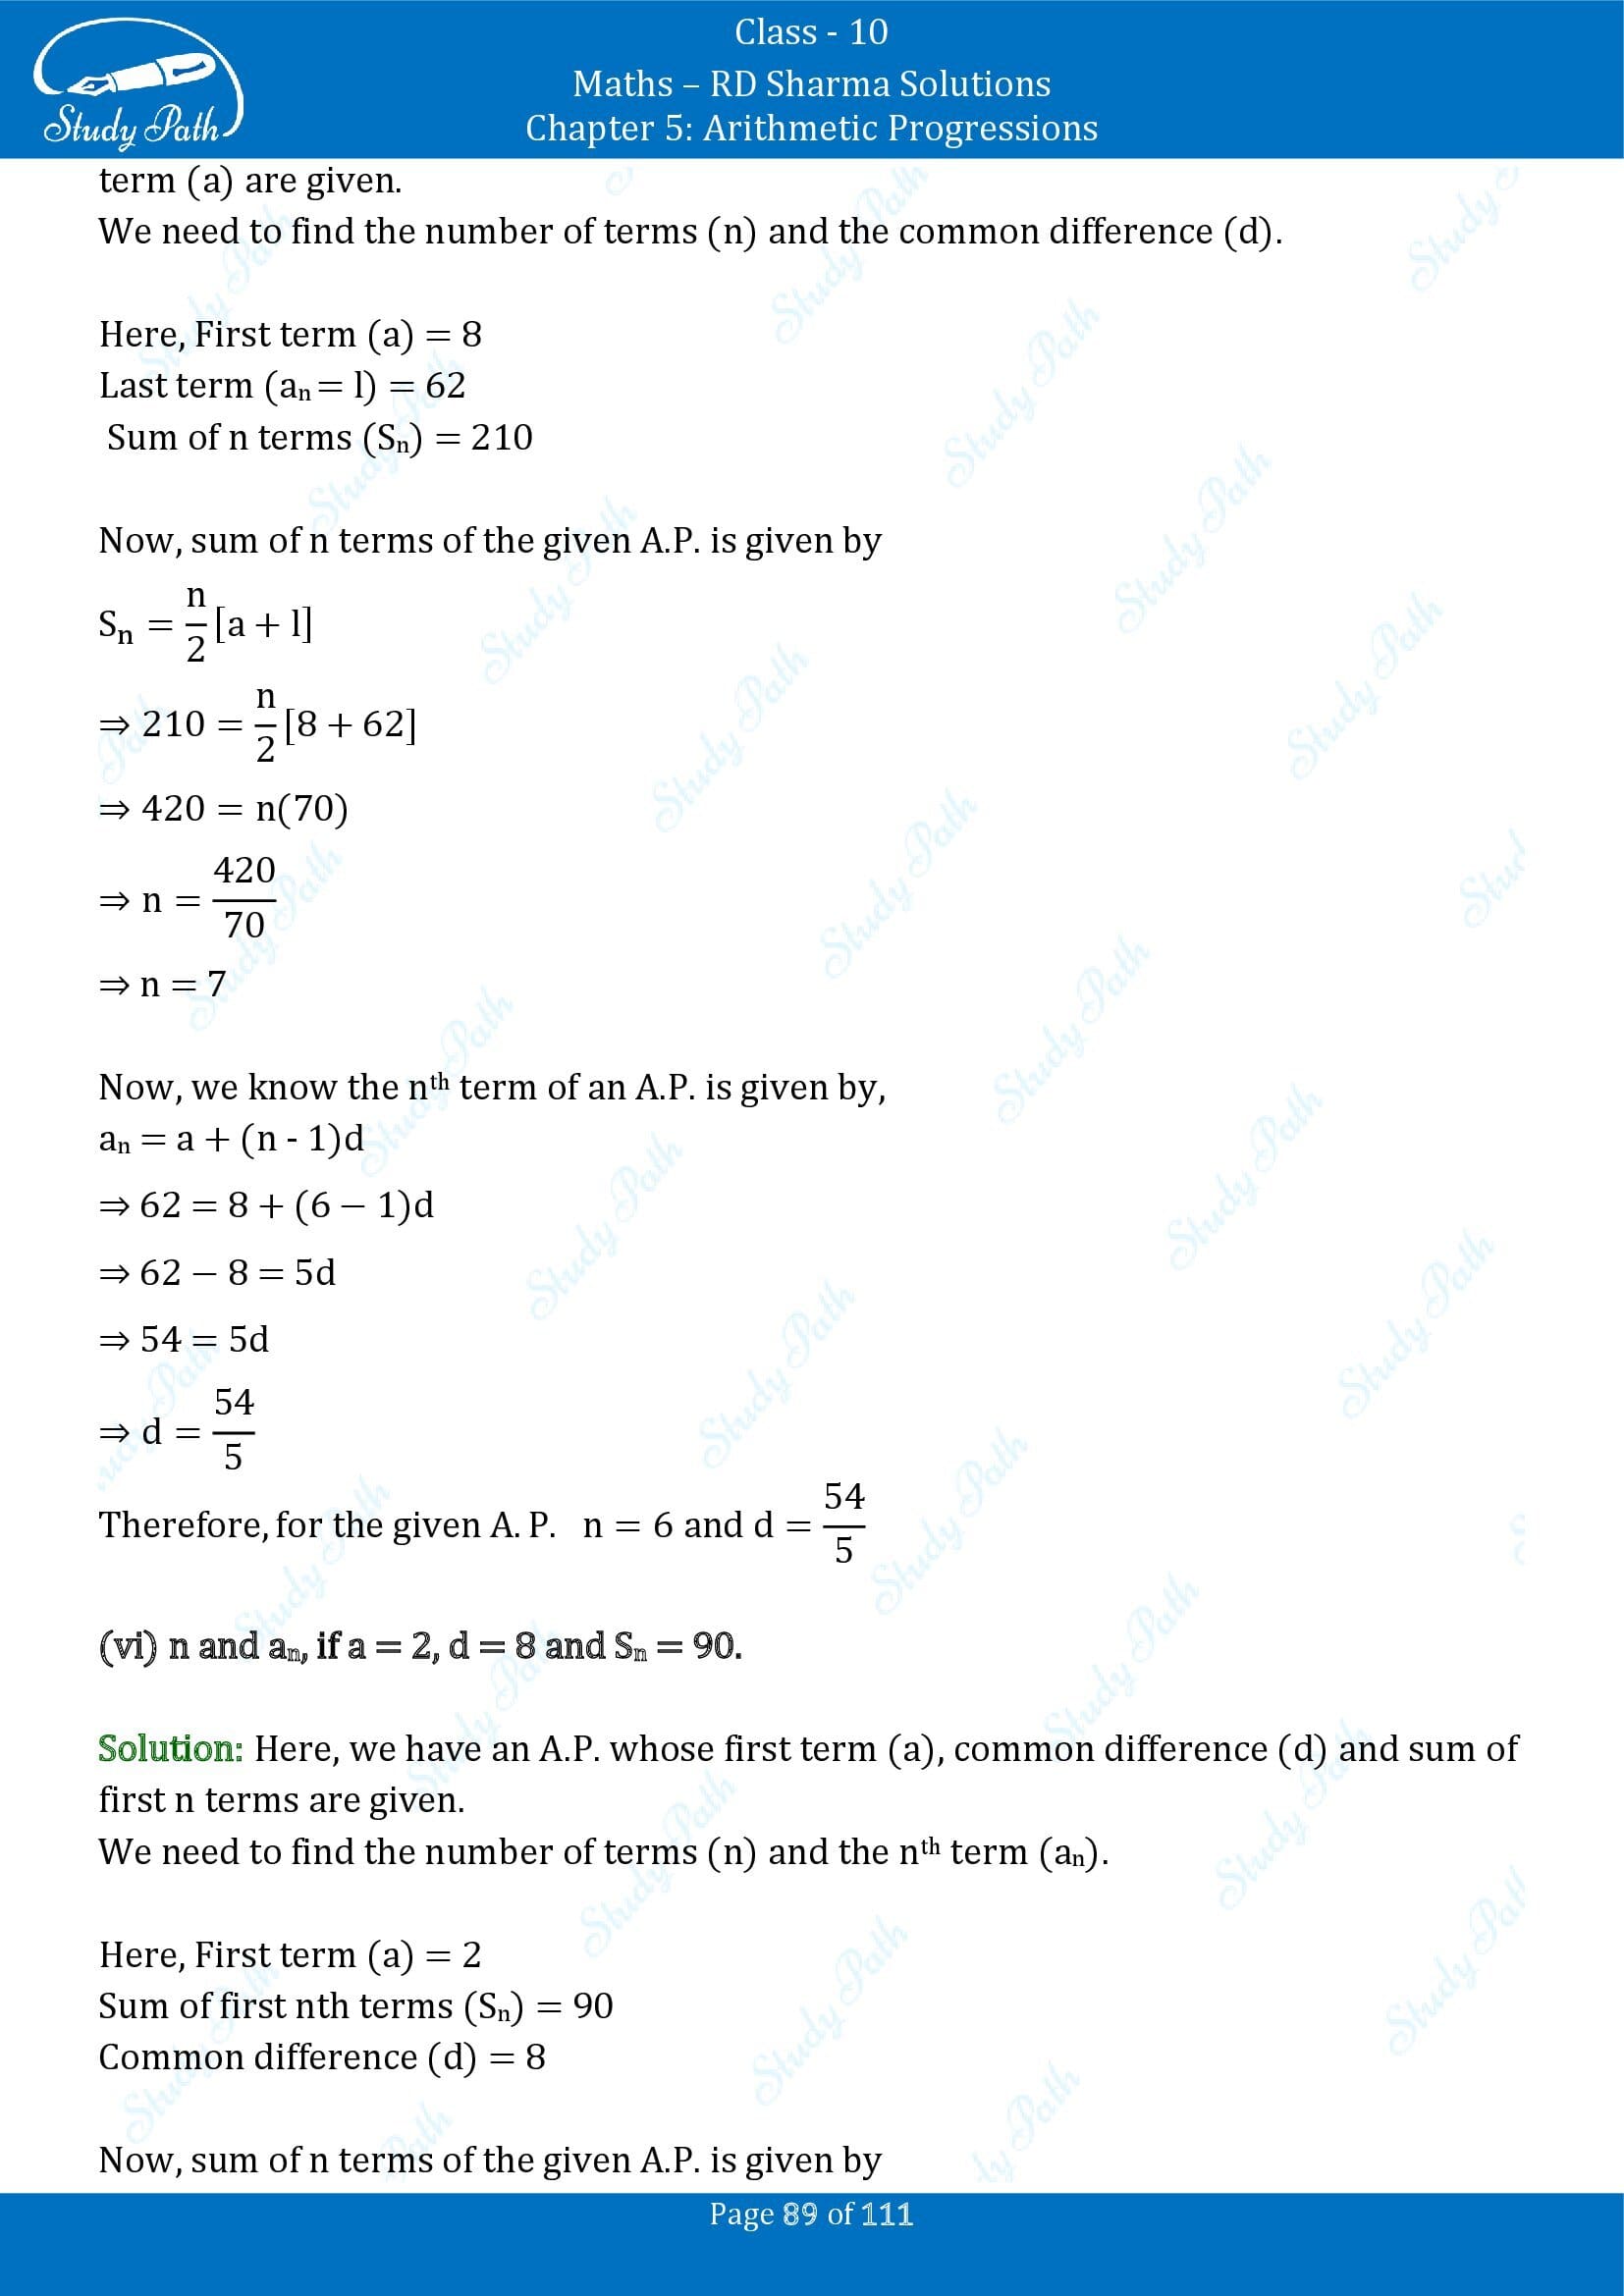 RD Sharma Solutions Class 10 Chapter 5 Arithmetic Progressions Exercise 5.6 00089